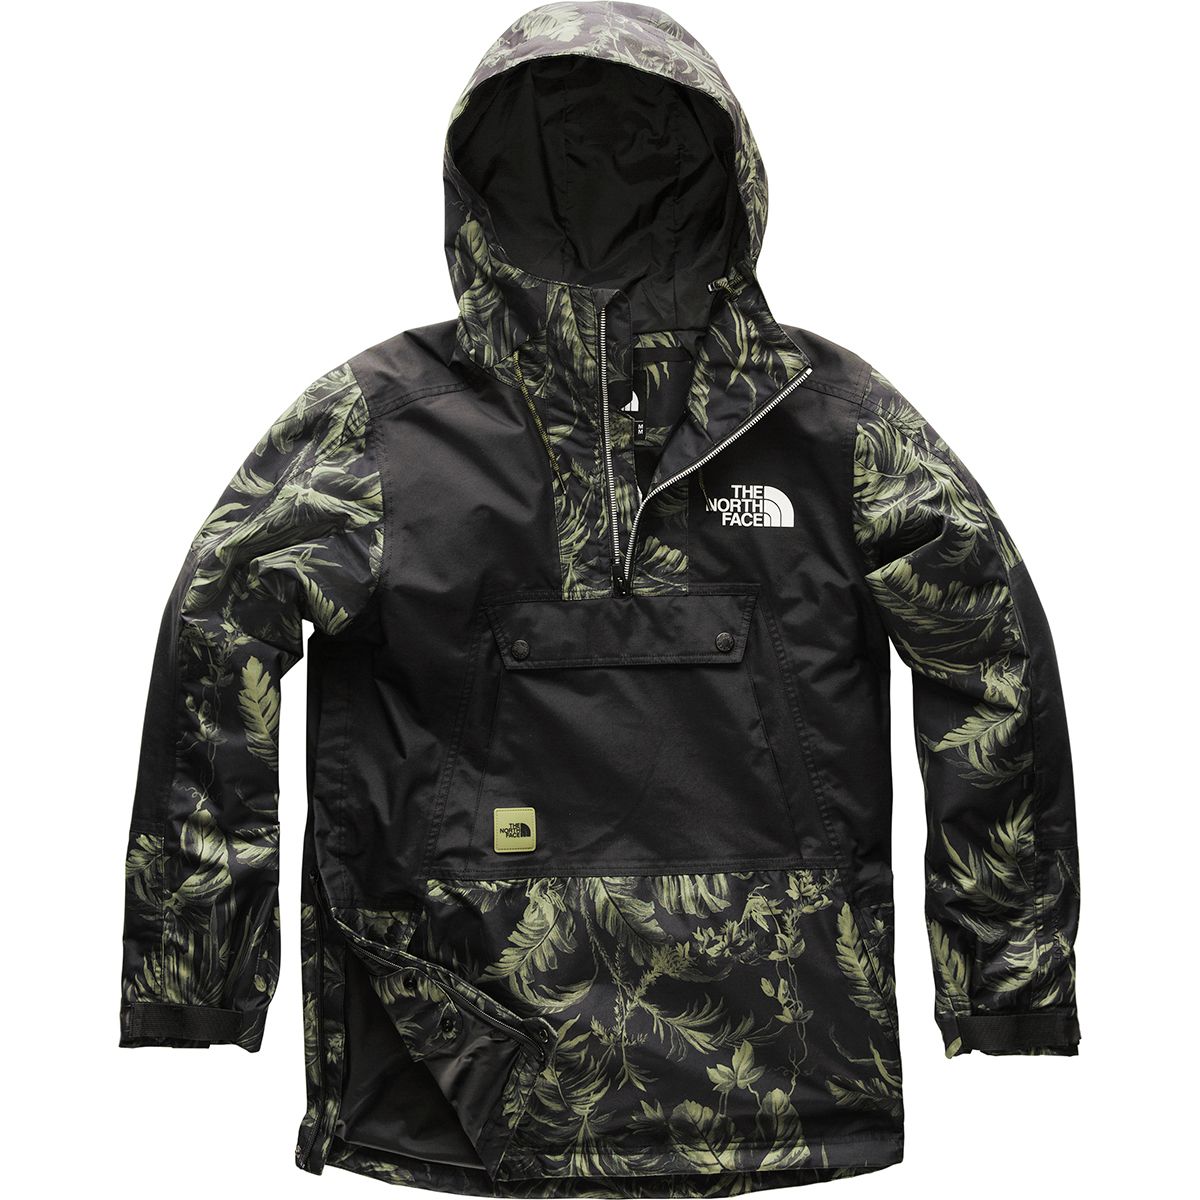 The North Face Silvani Jacket - Men's | Backcountry.com